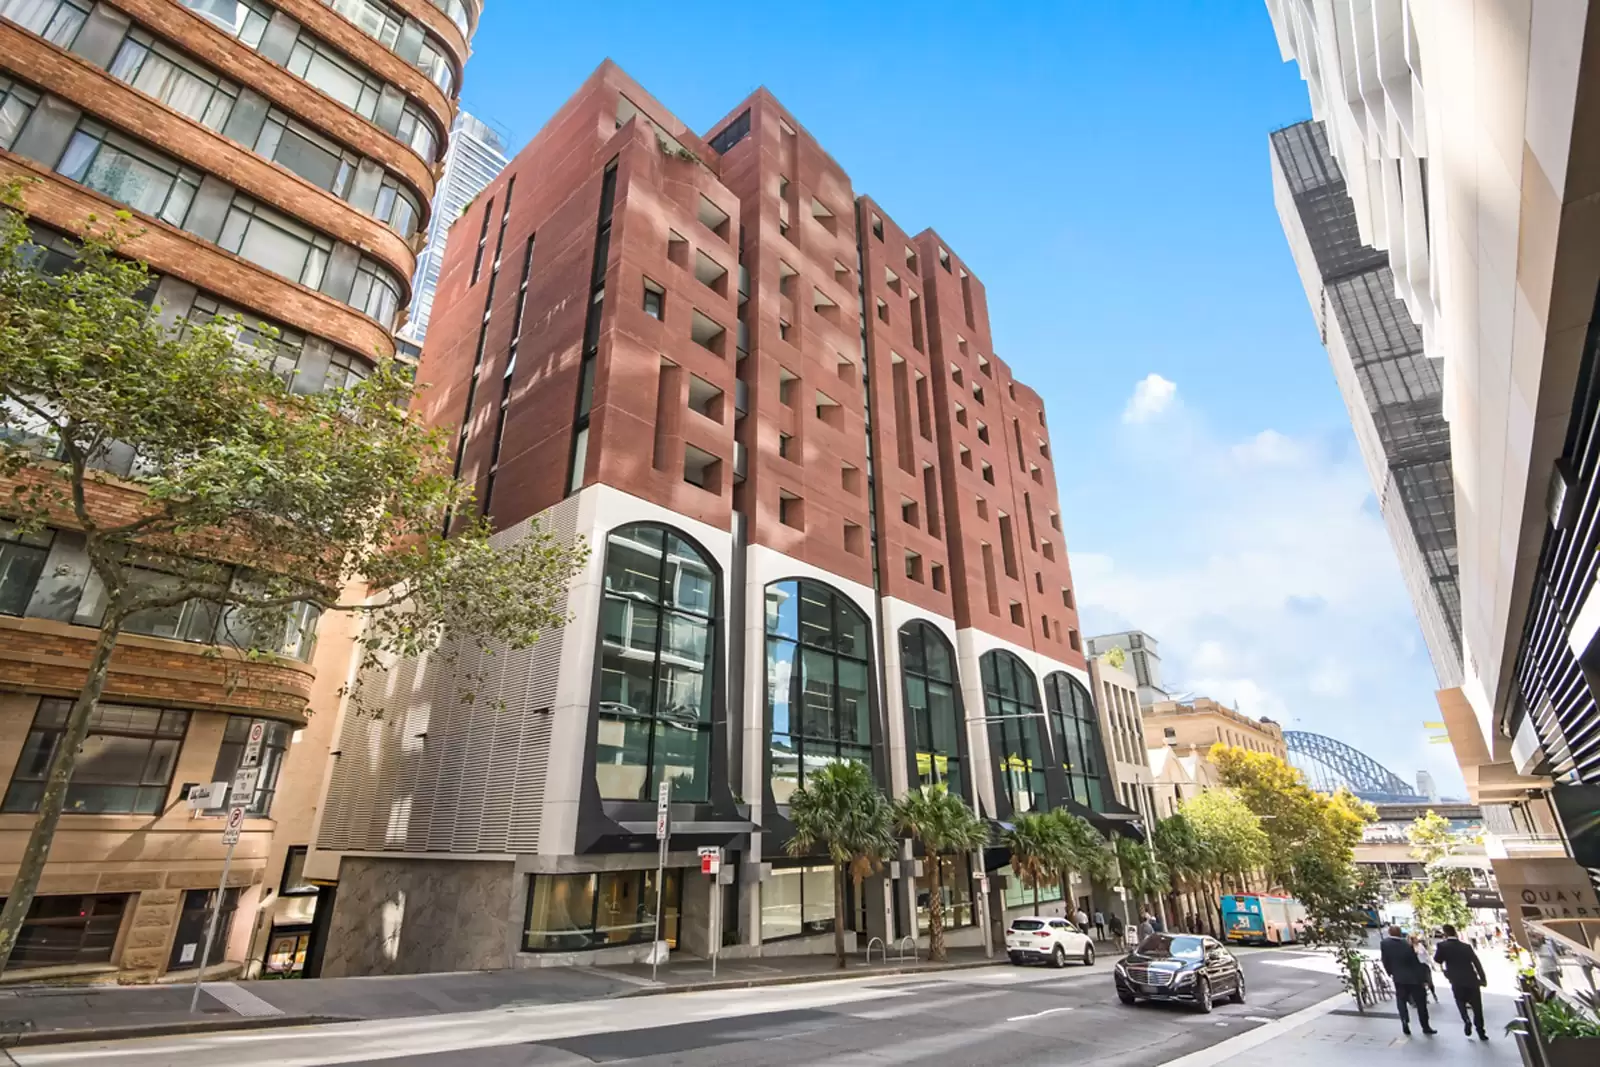 Photo #18: 801/15 Young Street, Sydney - Sold by Sydney Sotheby's International Realty